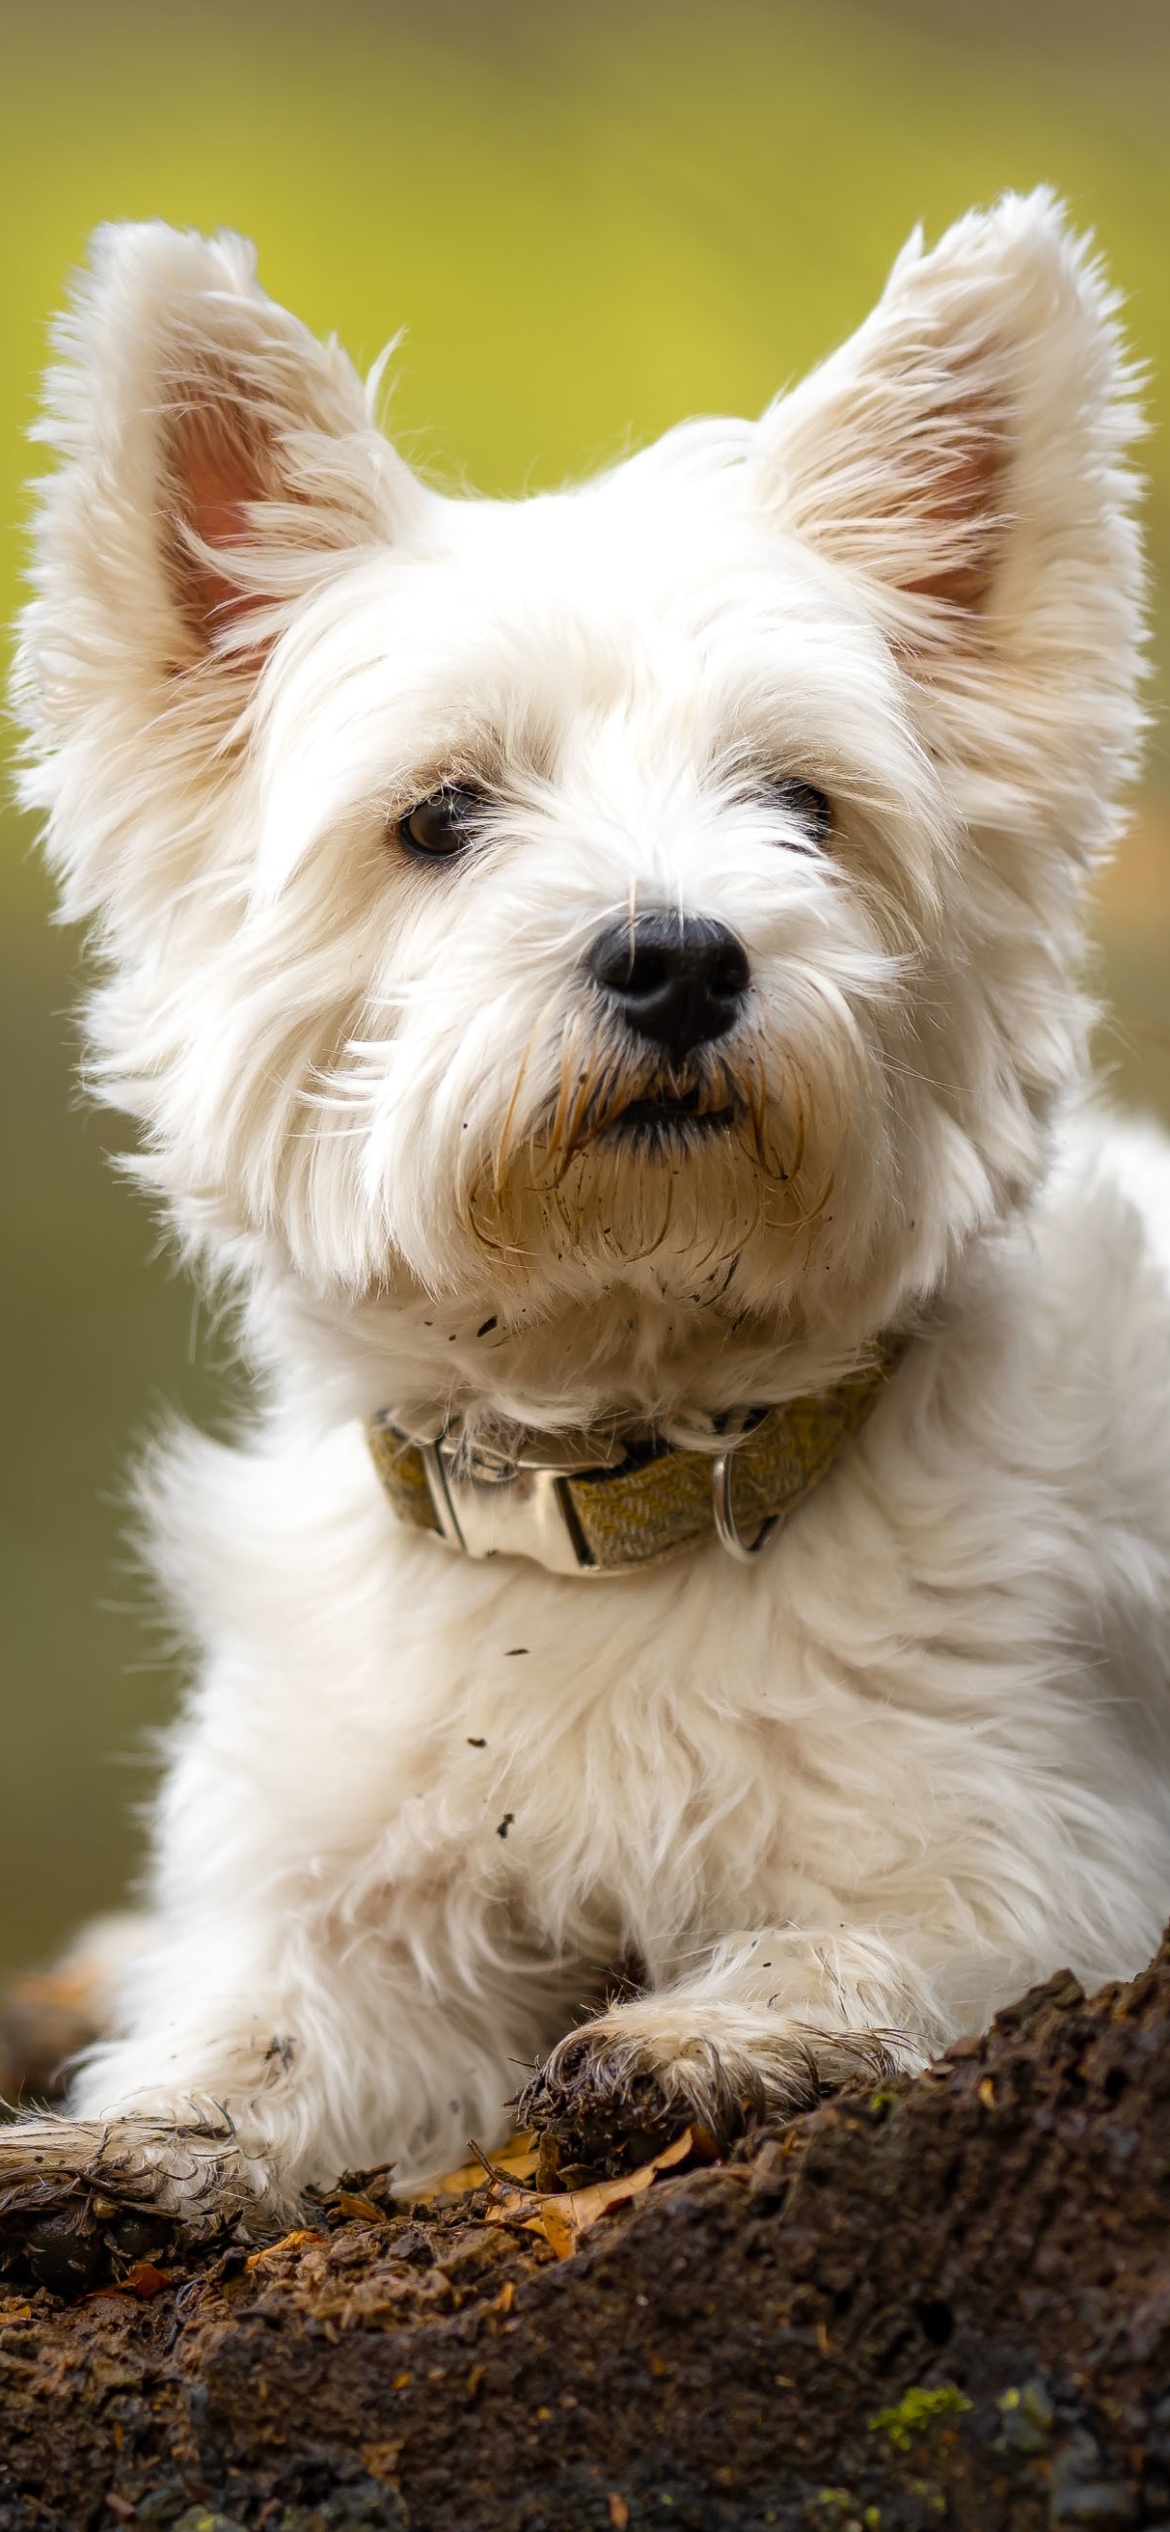 android animal, west highland white terrier, dog, dogs